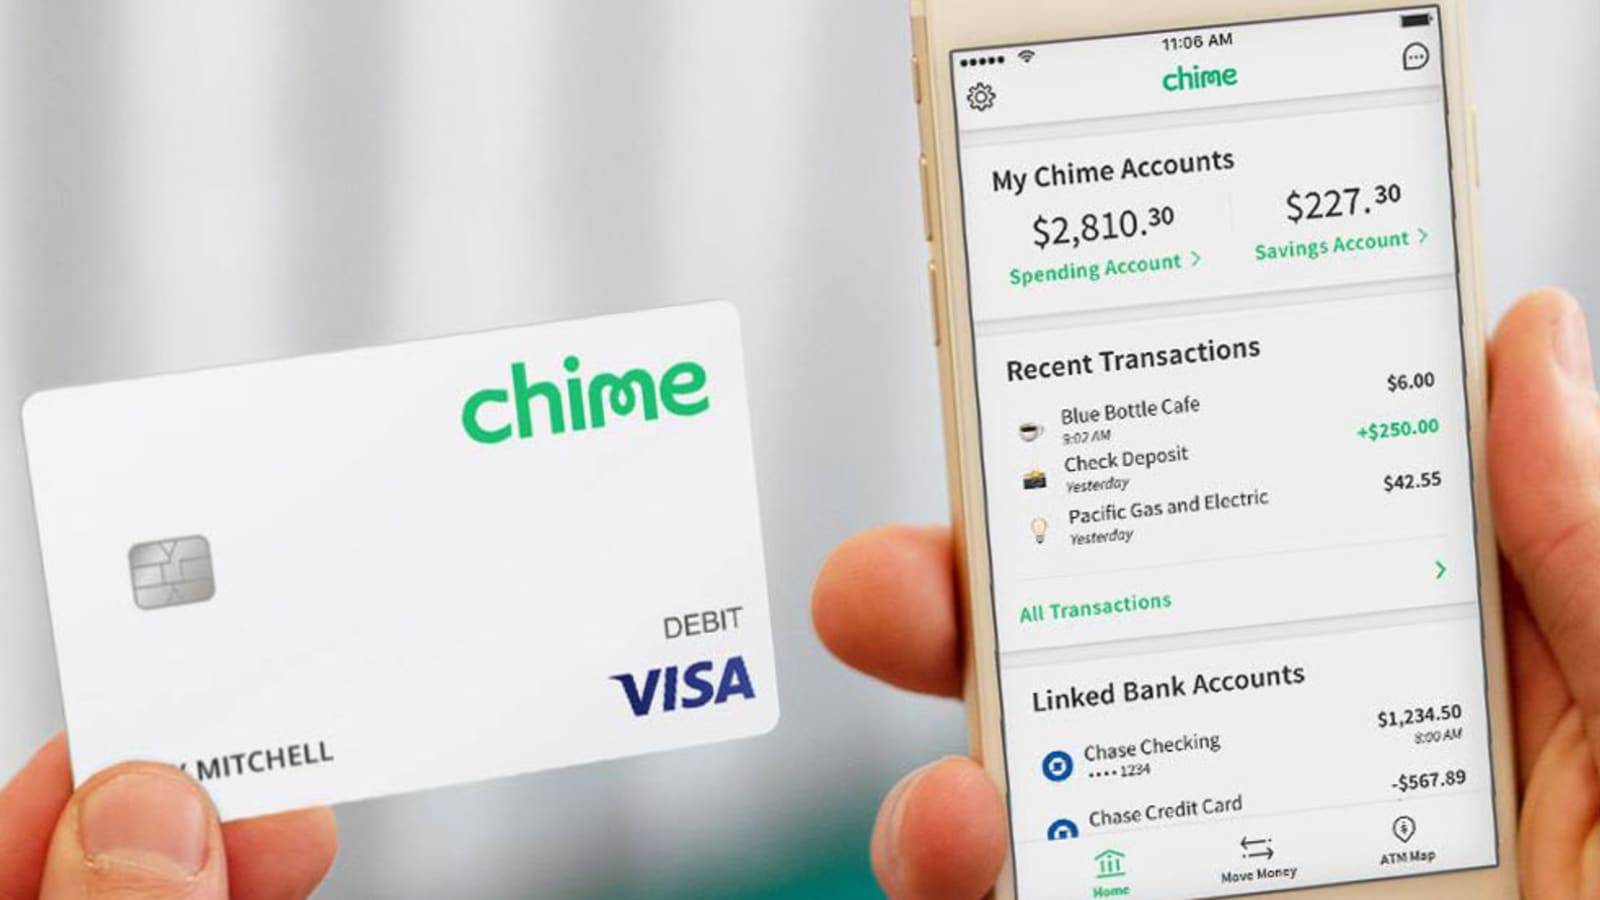 How To Download And Use The Chime Mobile App